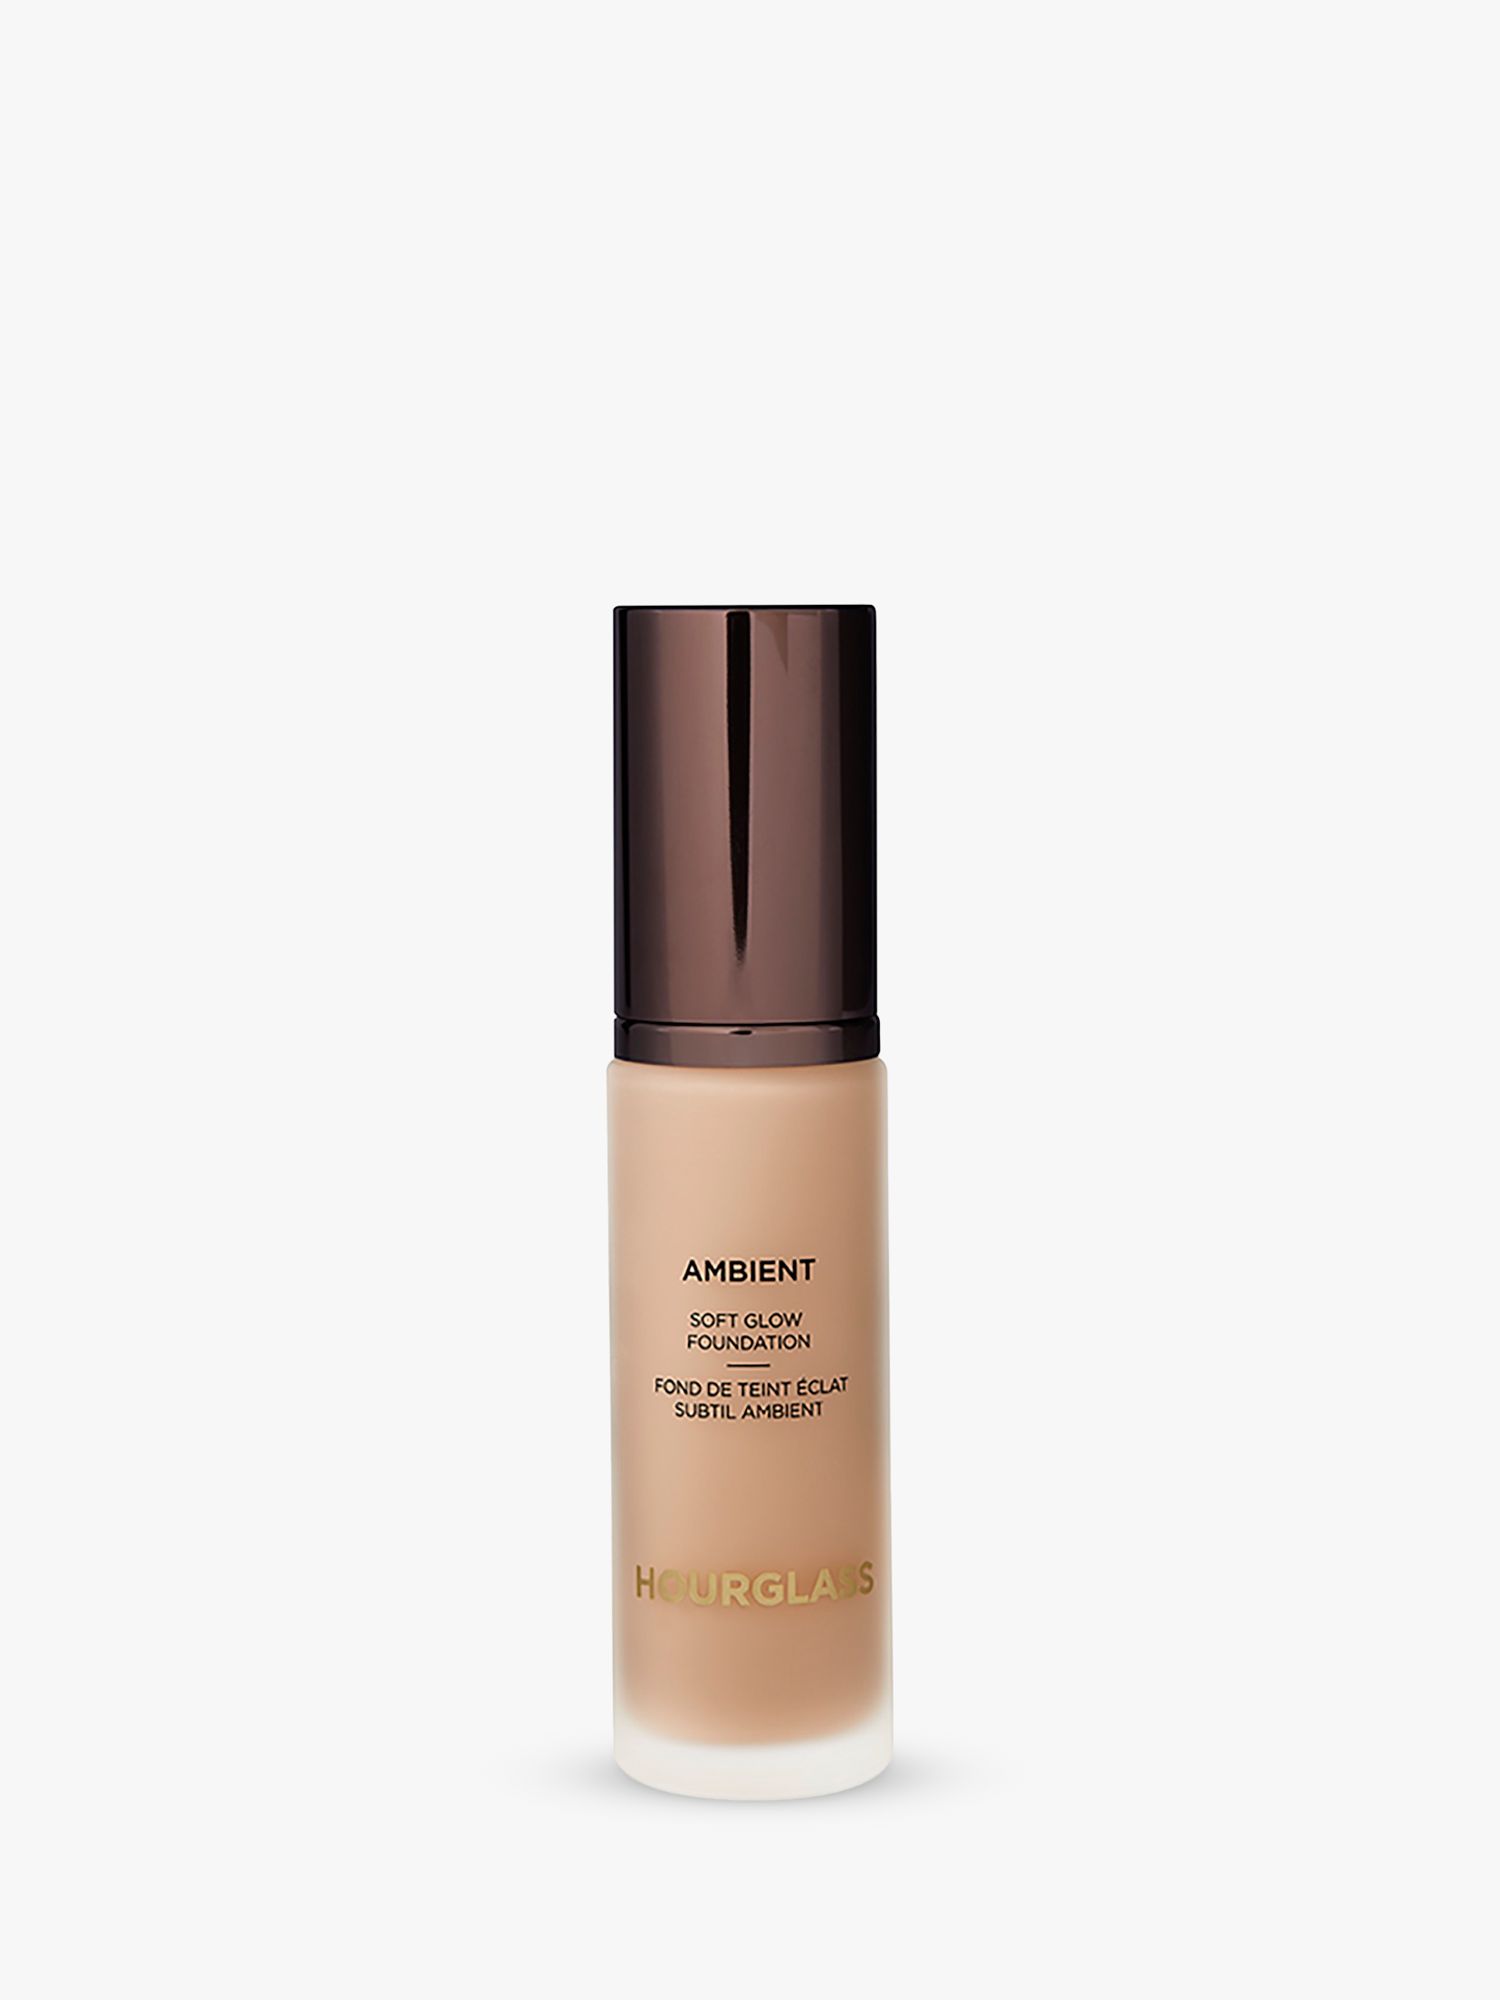 Hourglass Ambient Soft Glow Foundation, 5.5 1